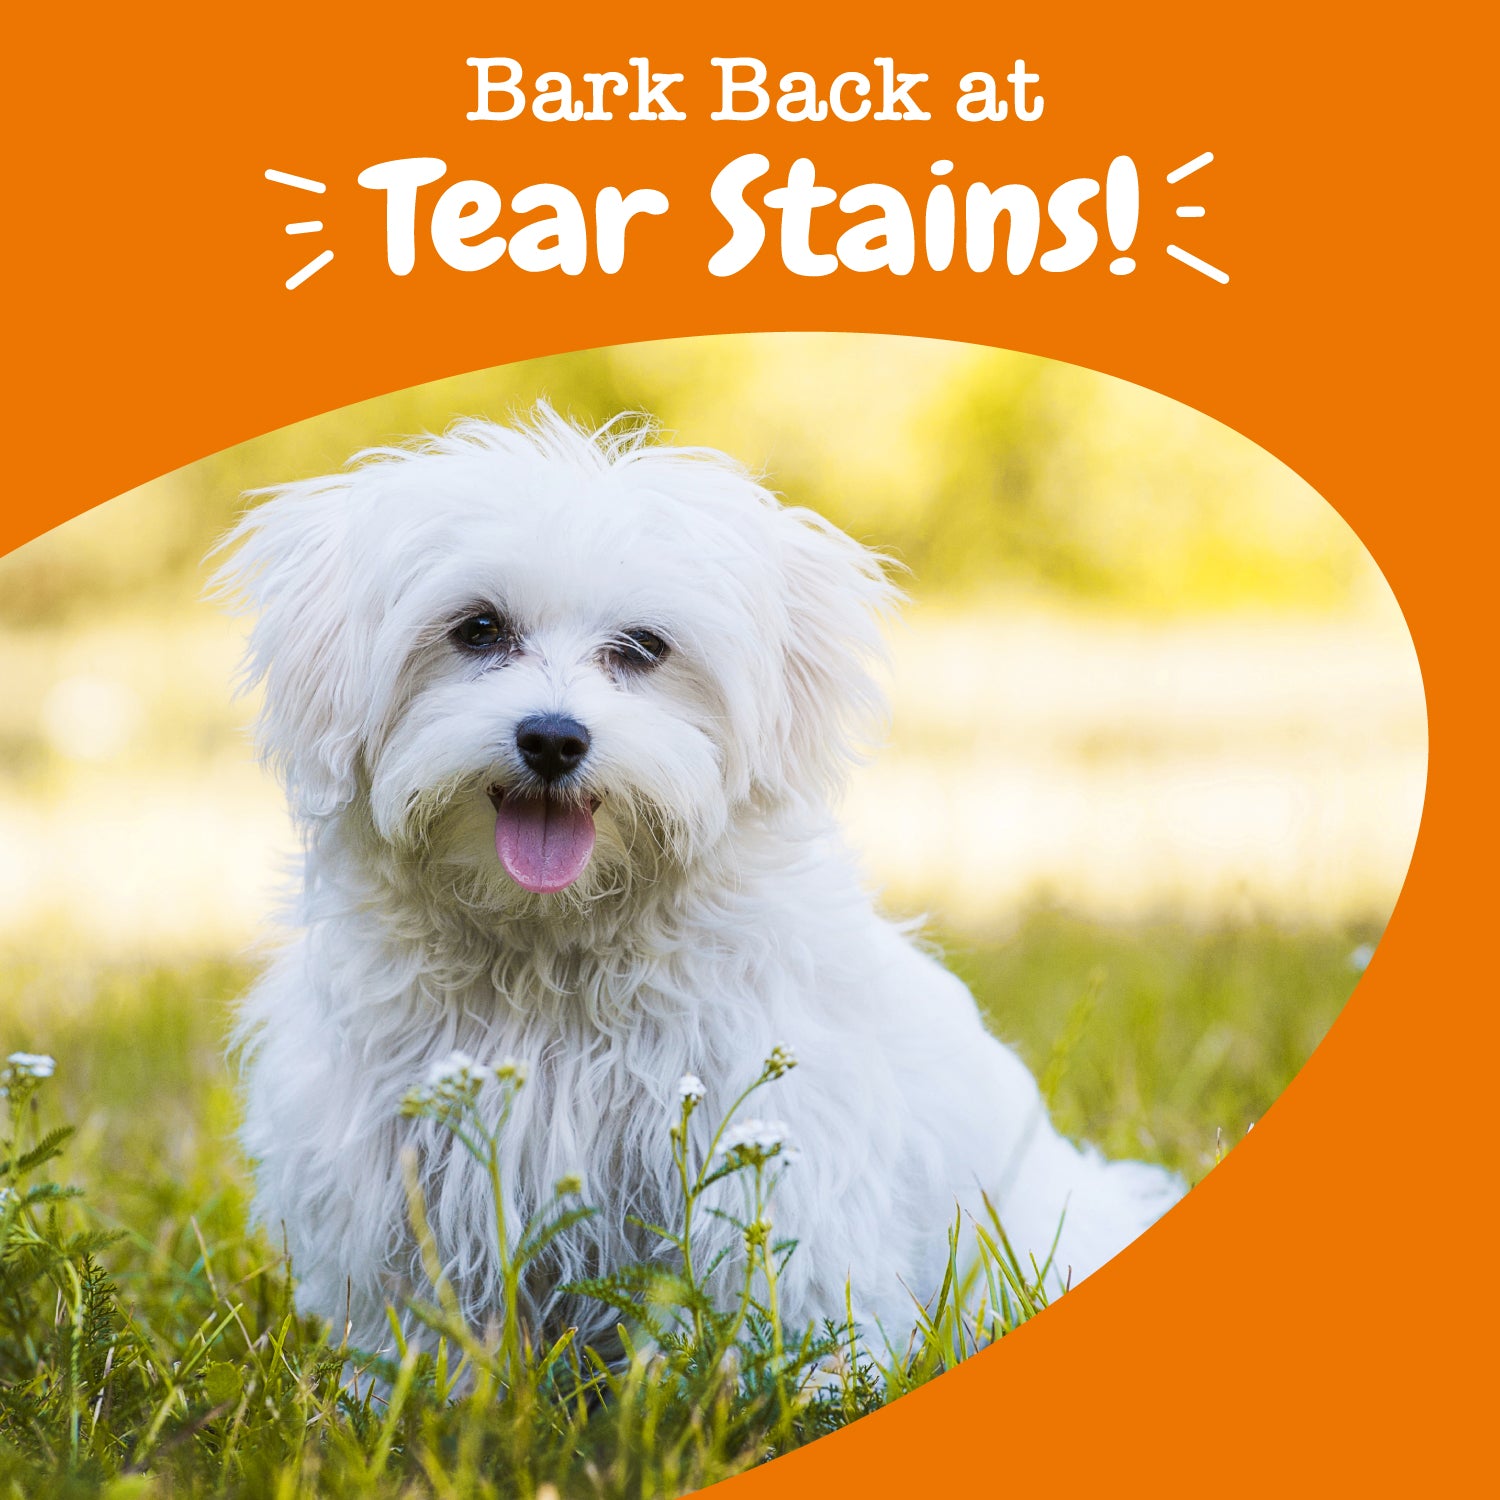 Tear Stain Bites For Dogs